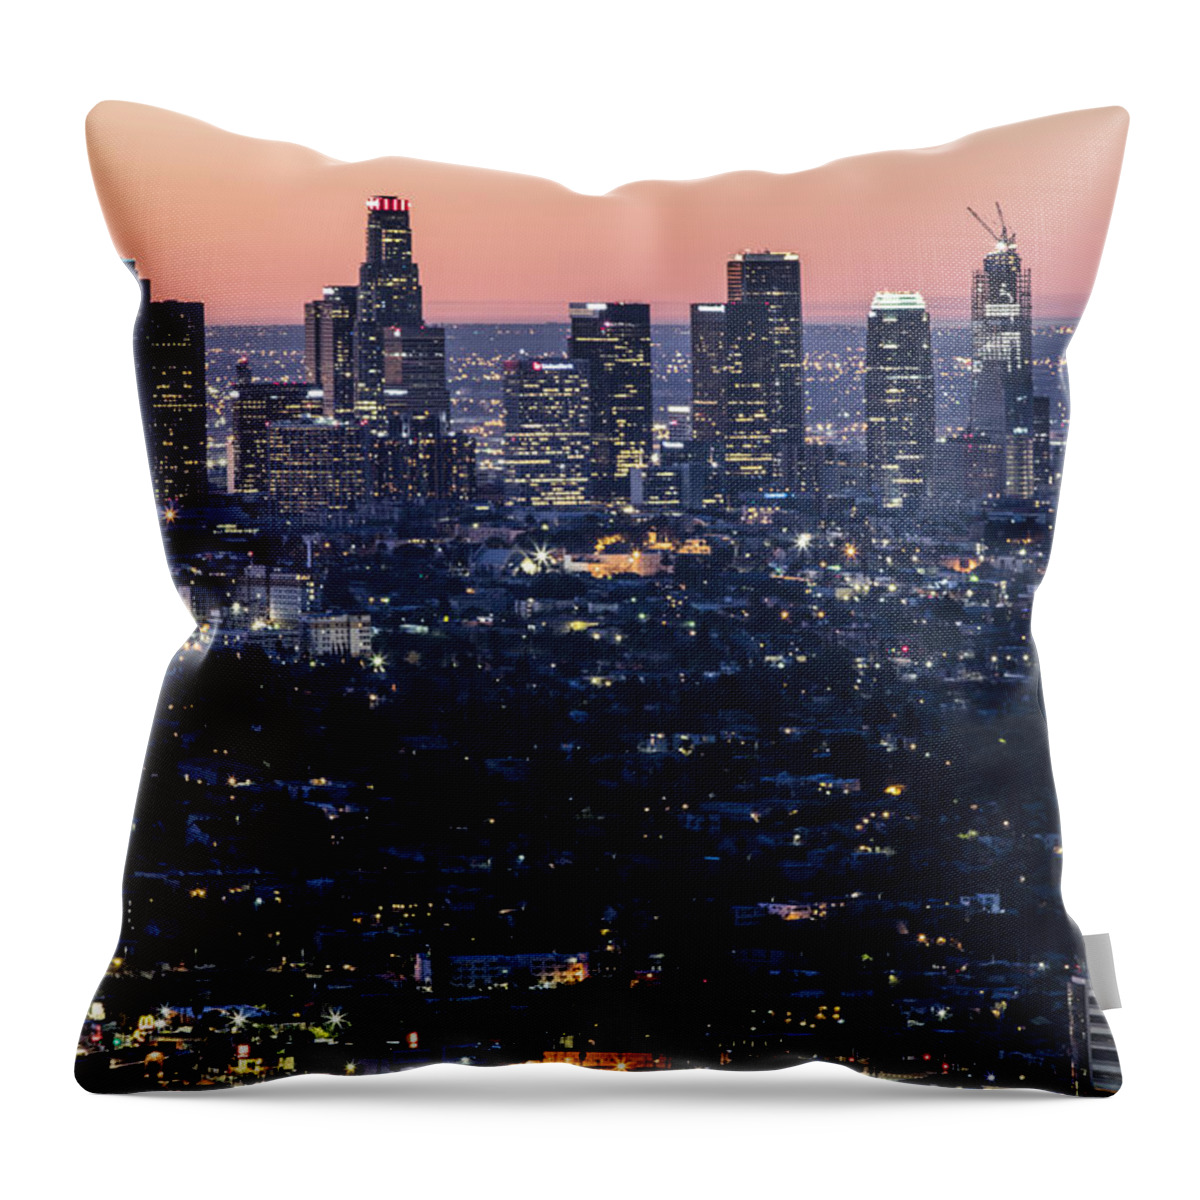 Los Angeles Throw Pillow featuring the photograph Los Angeles Sunrise Close Up by John McGraw